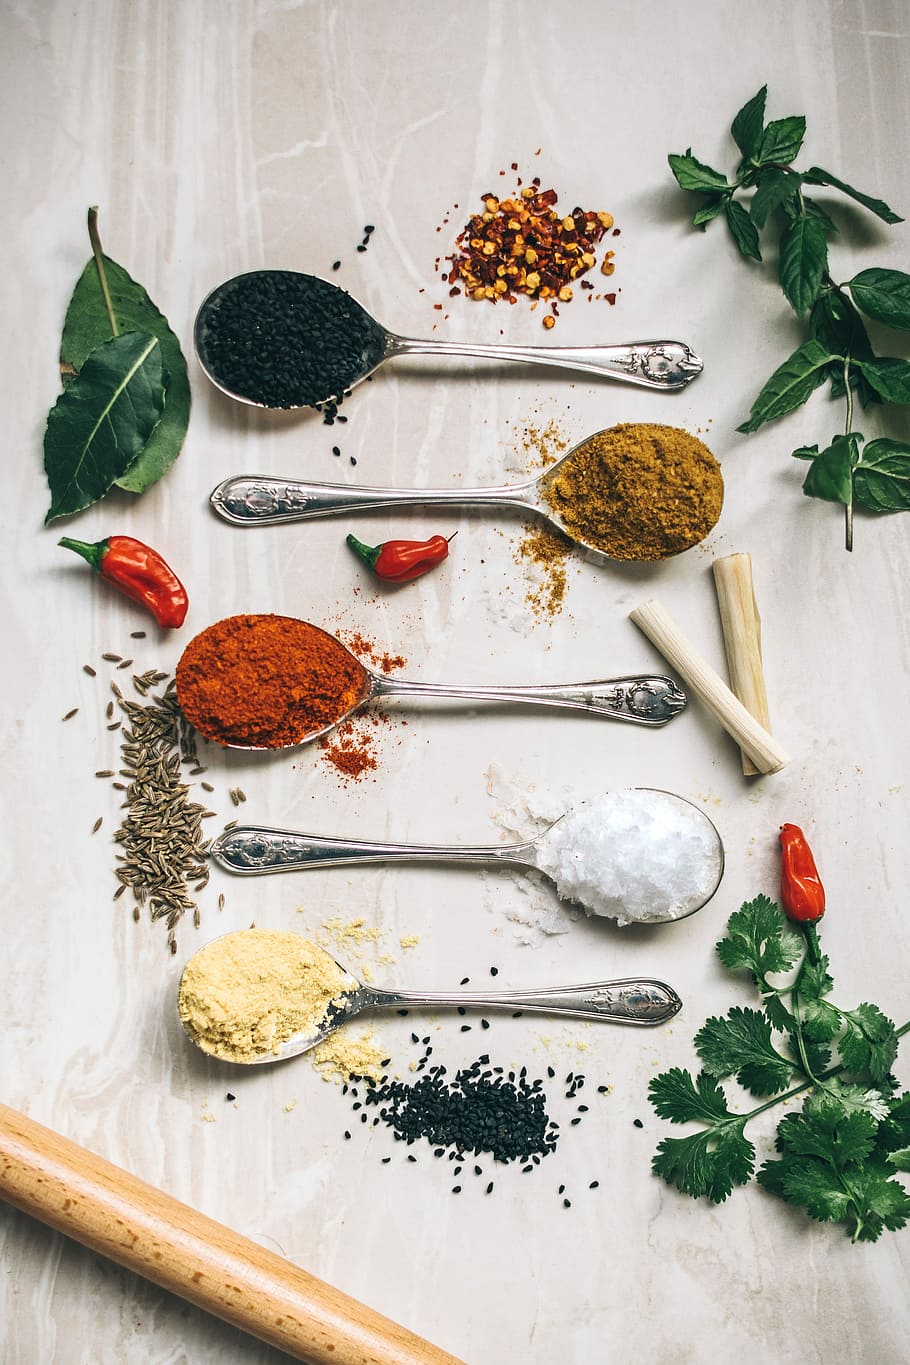 five gray spoons filled with assorted-color powders near chilli, flat lay photography of spoons filled with spice powders on furniture board, HD wallpaper